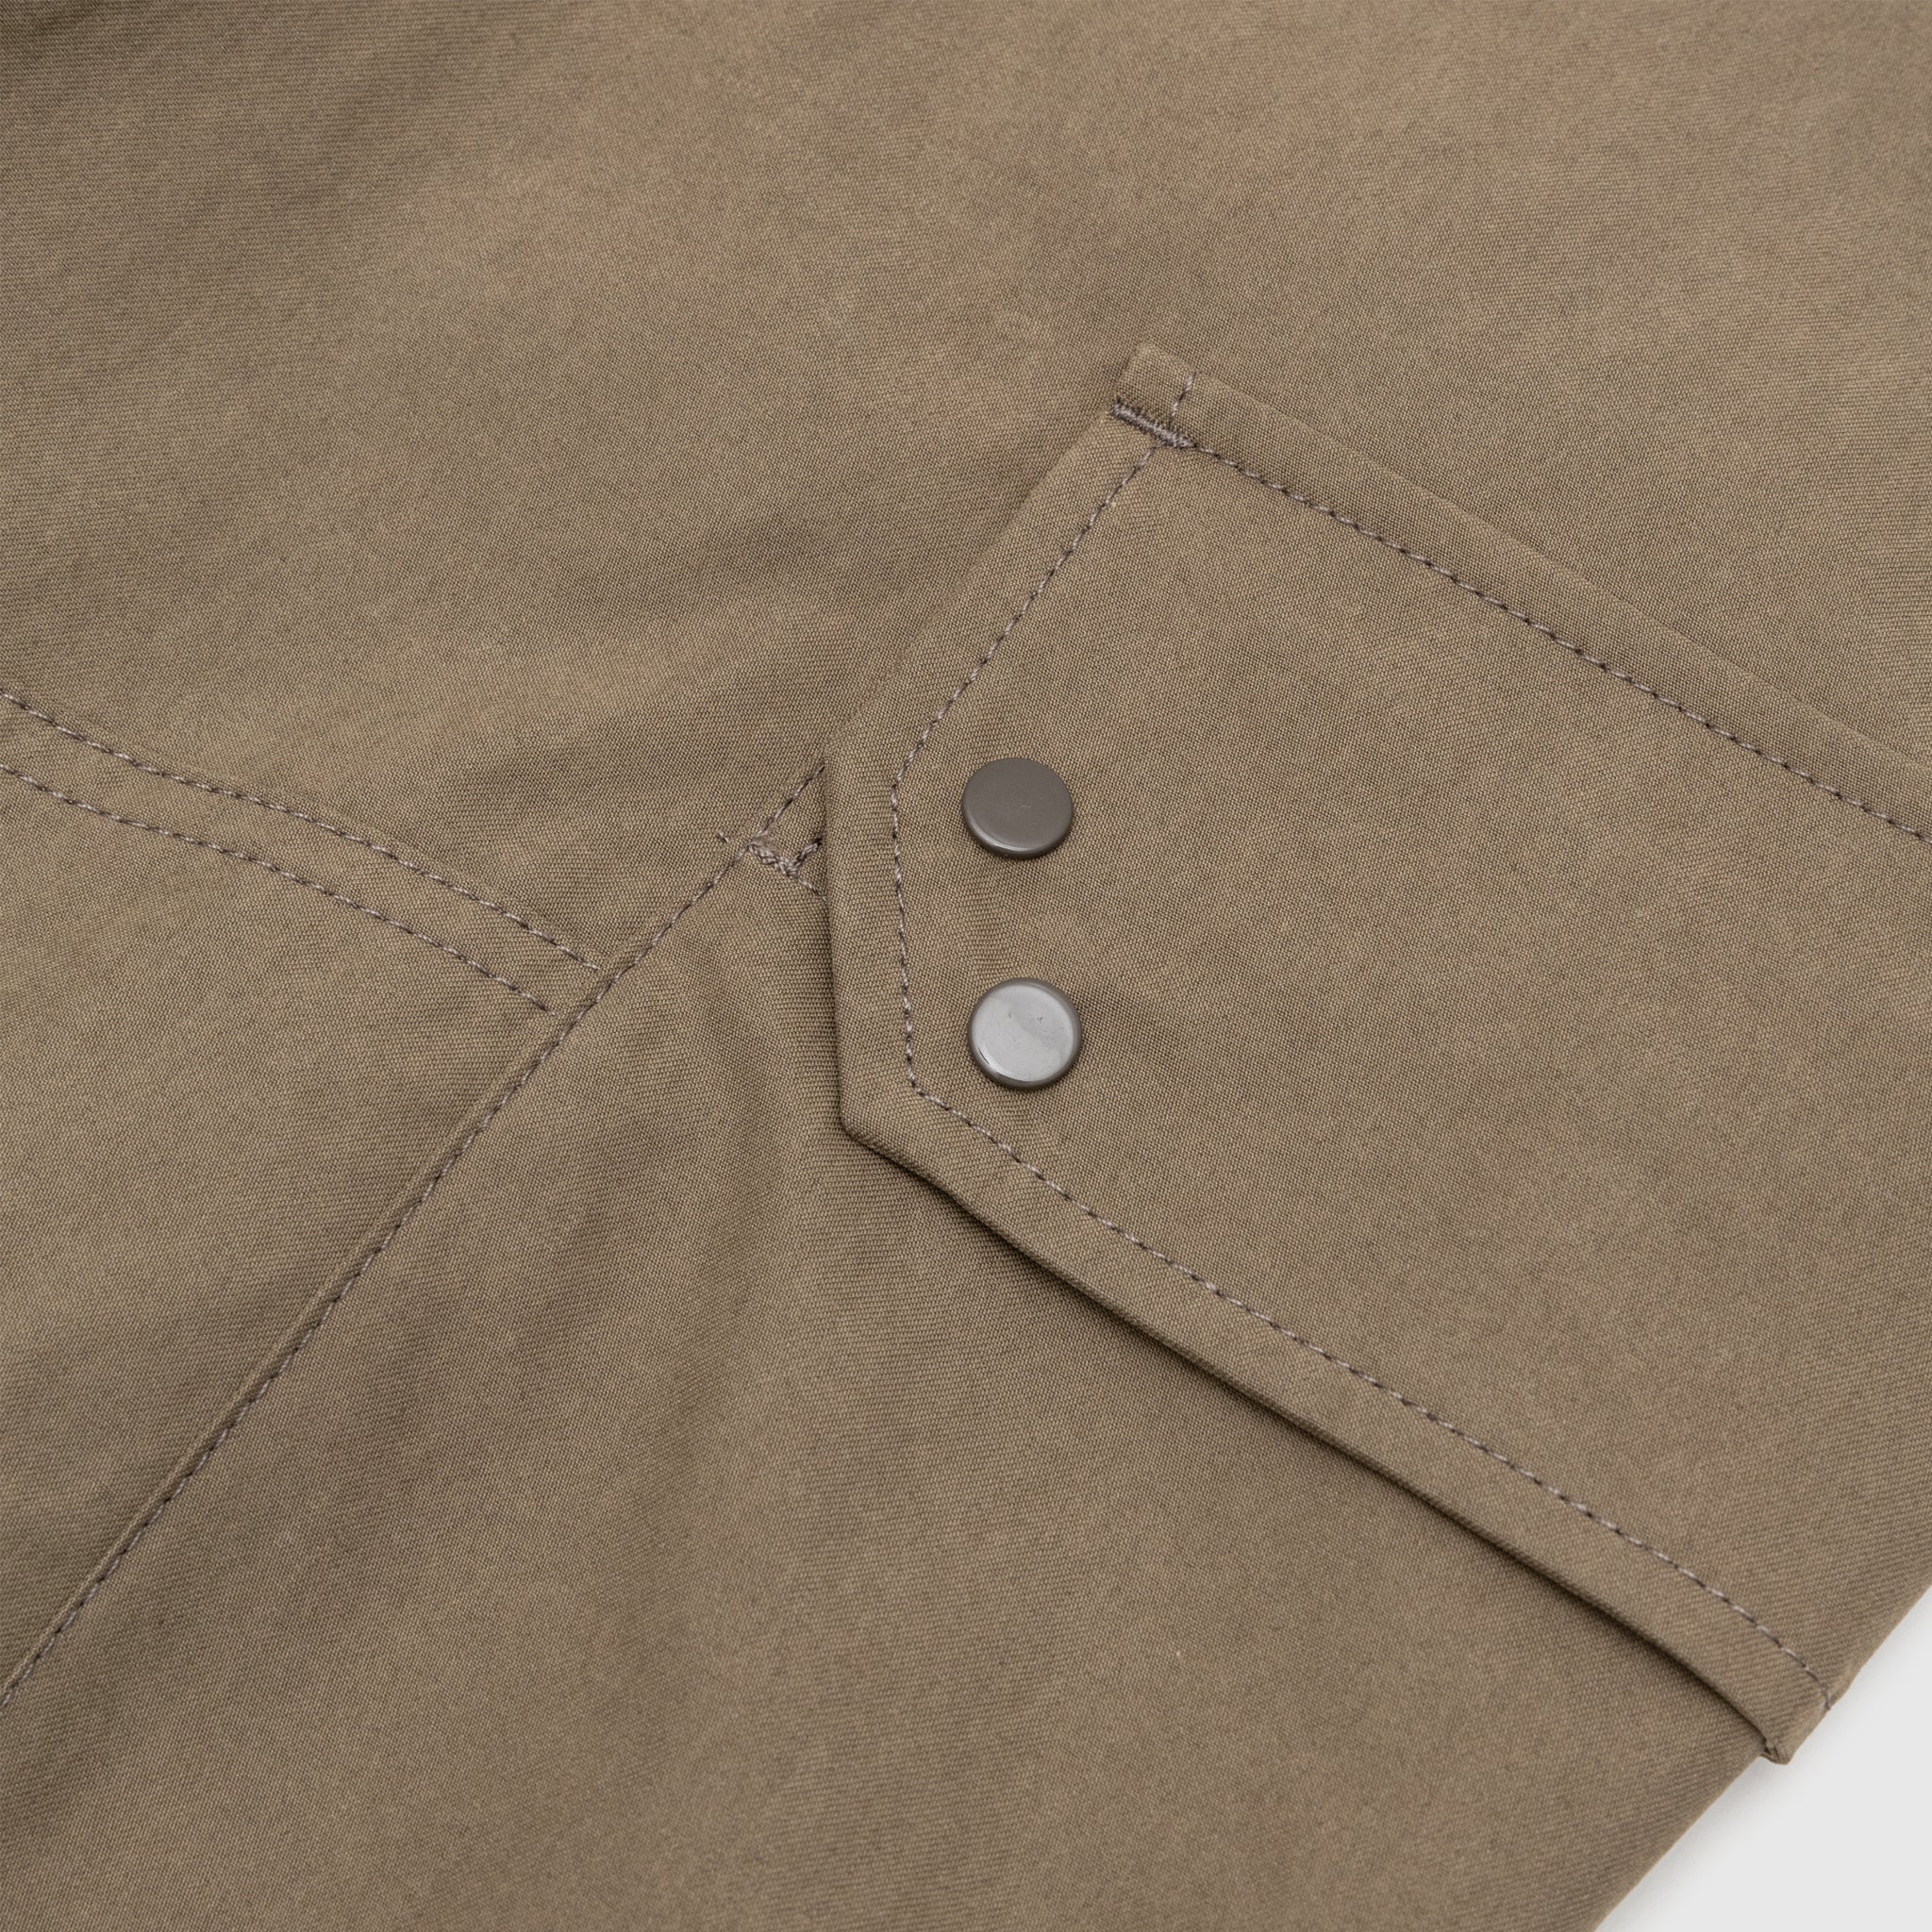 CARGO TROUSERS